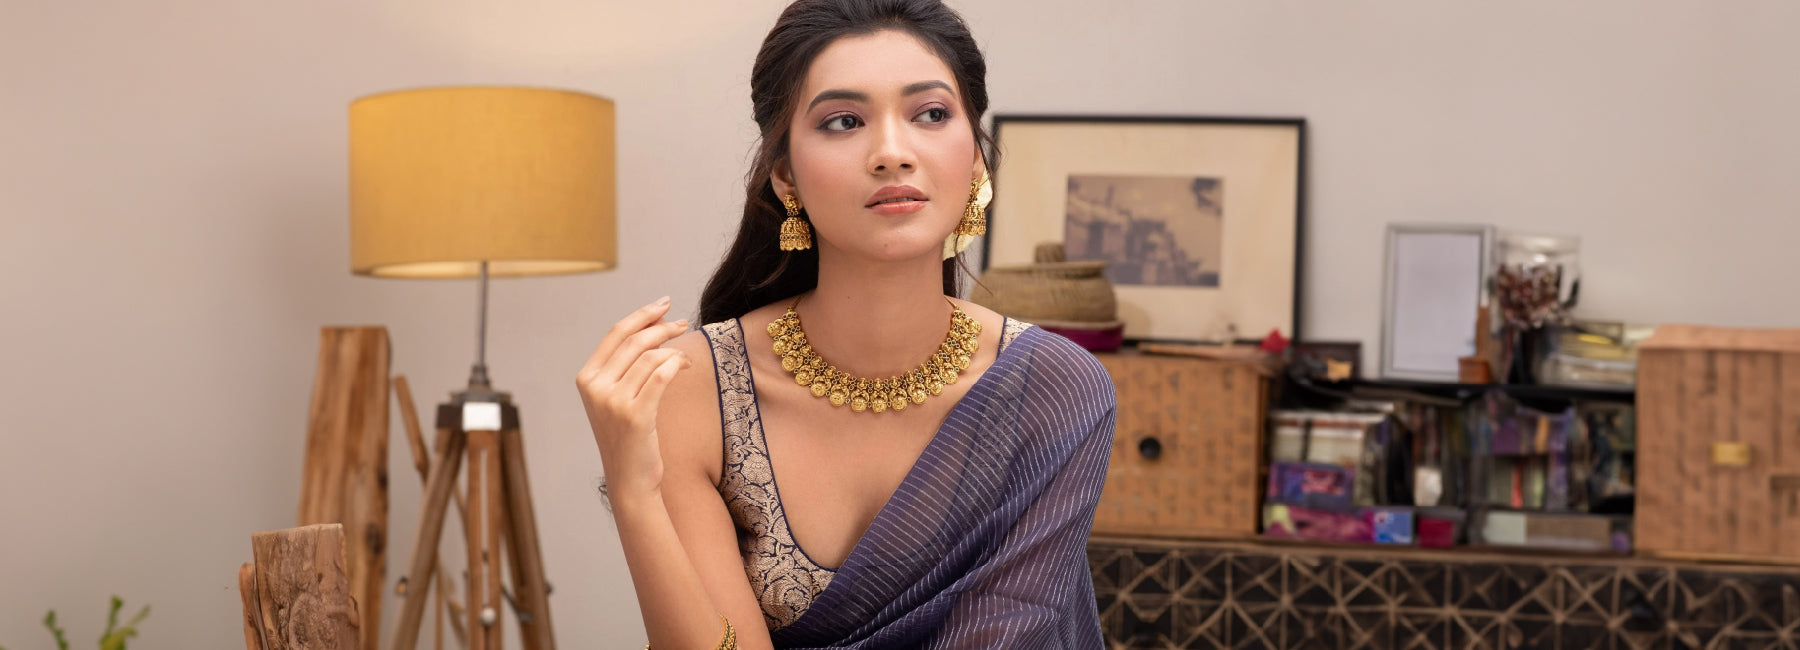 How to Choose the Perfect Indian Jewelry Set for Your Outfit